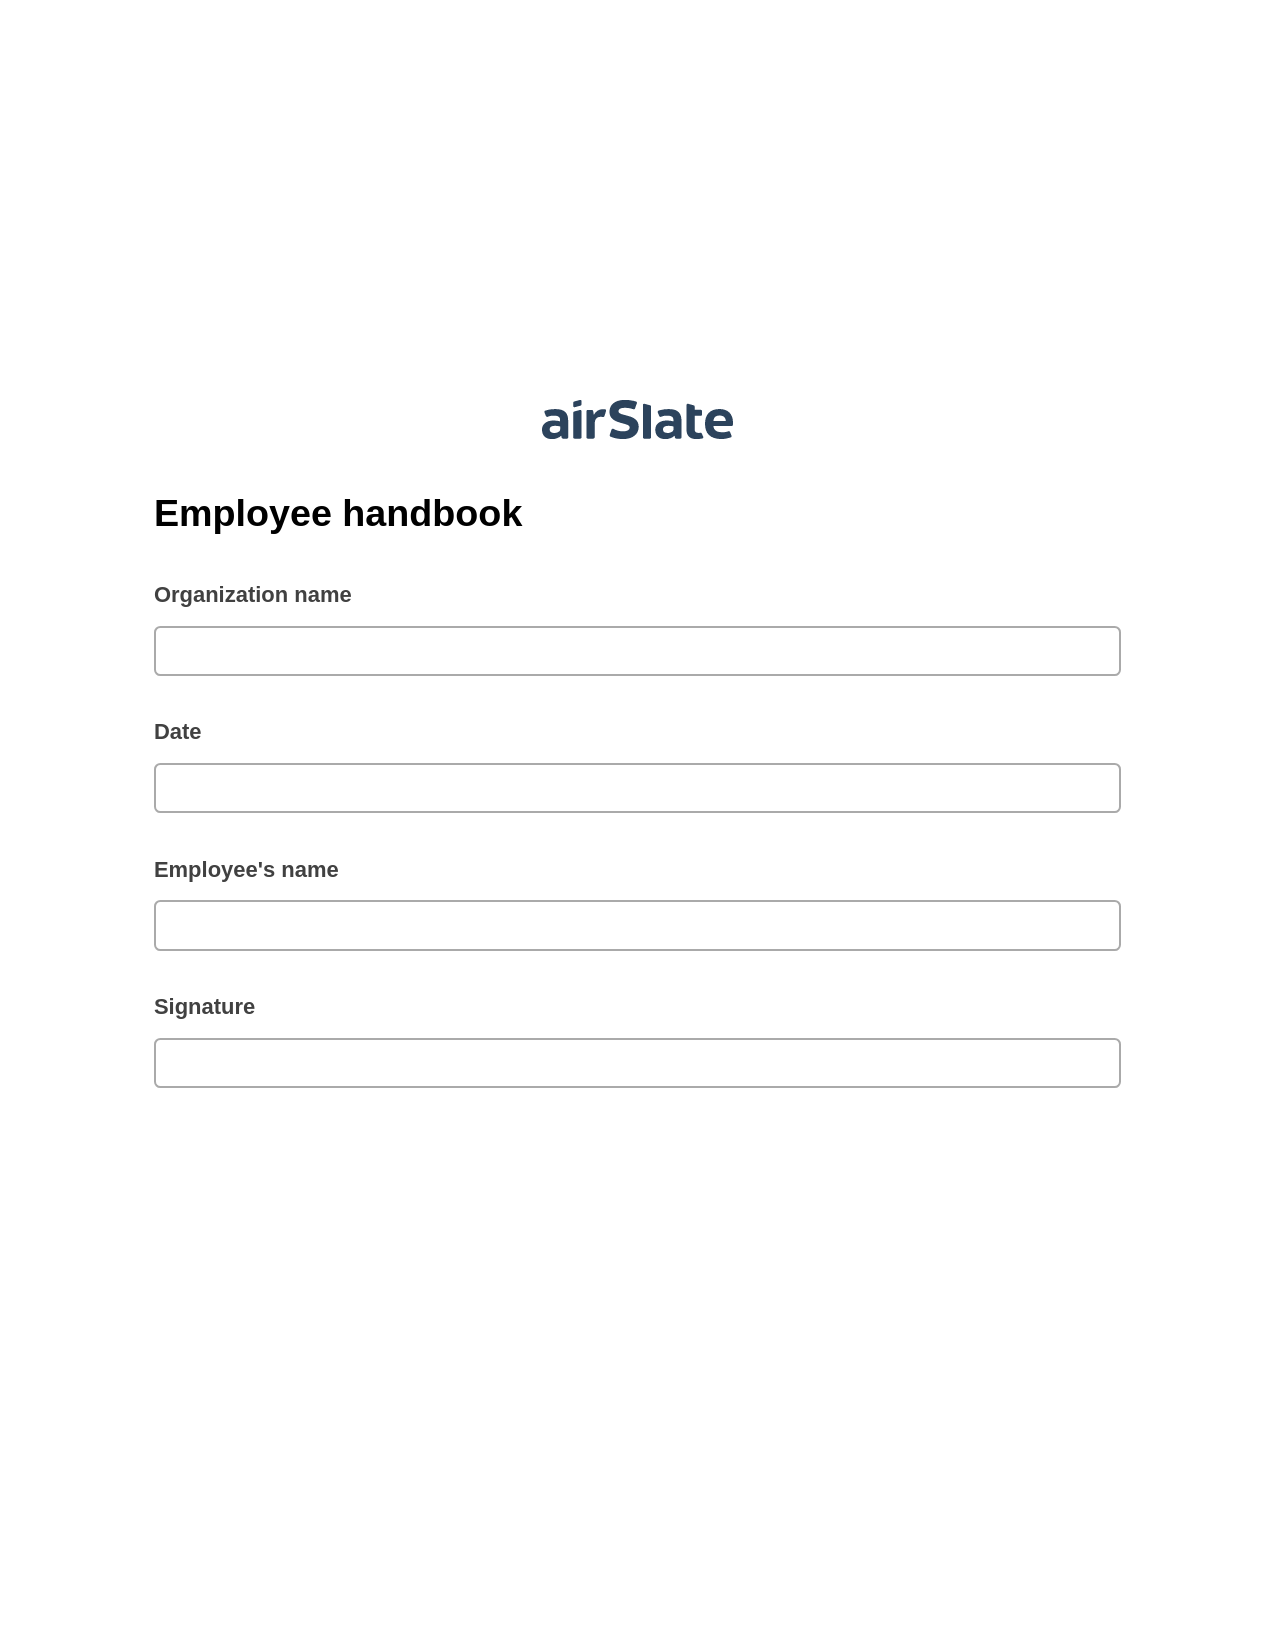 Multirole Employee handbook Pre-fill Slate from MS Dynamics 365 Records Bot, Roles Reminder Bot, Archive to SharePoint Folder Bot